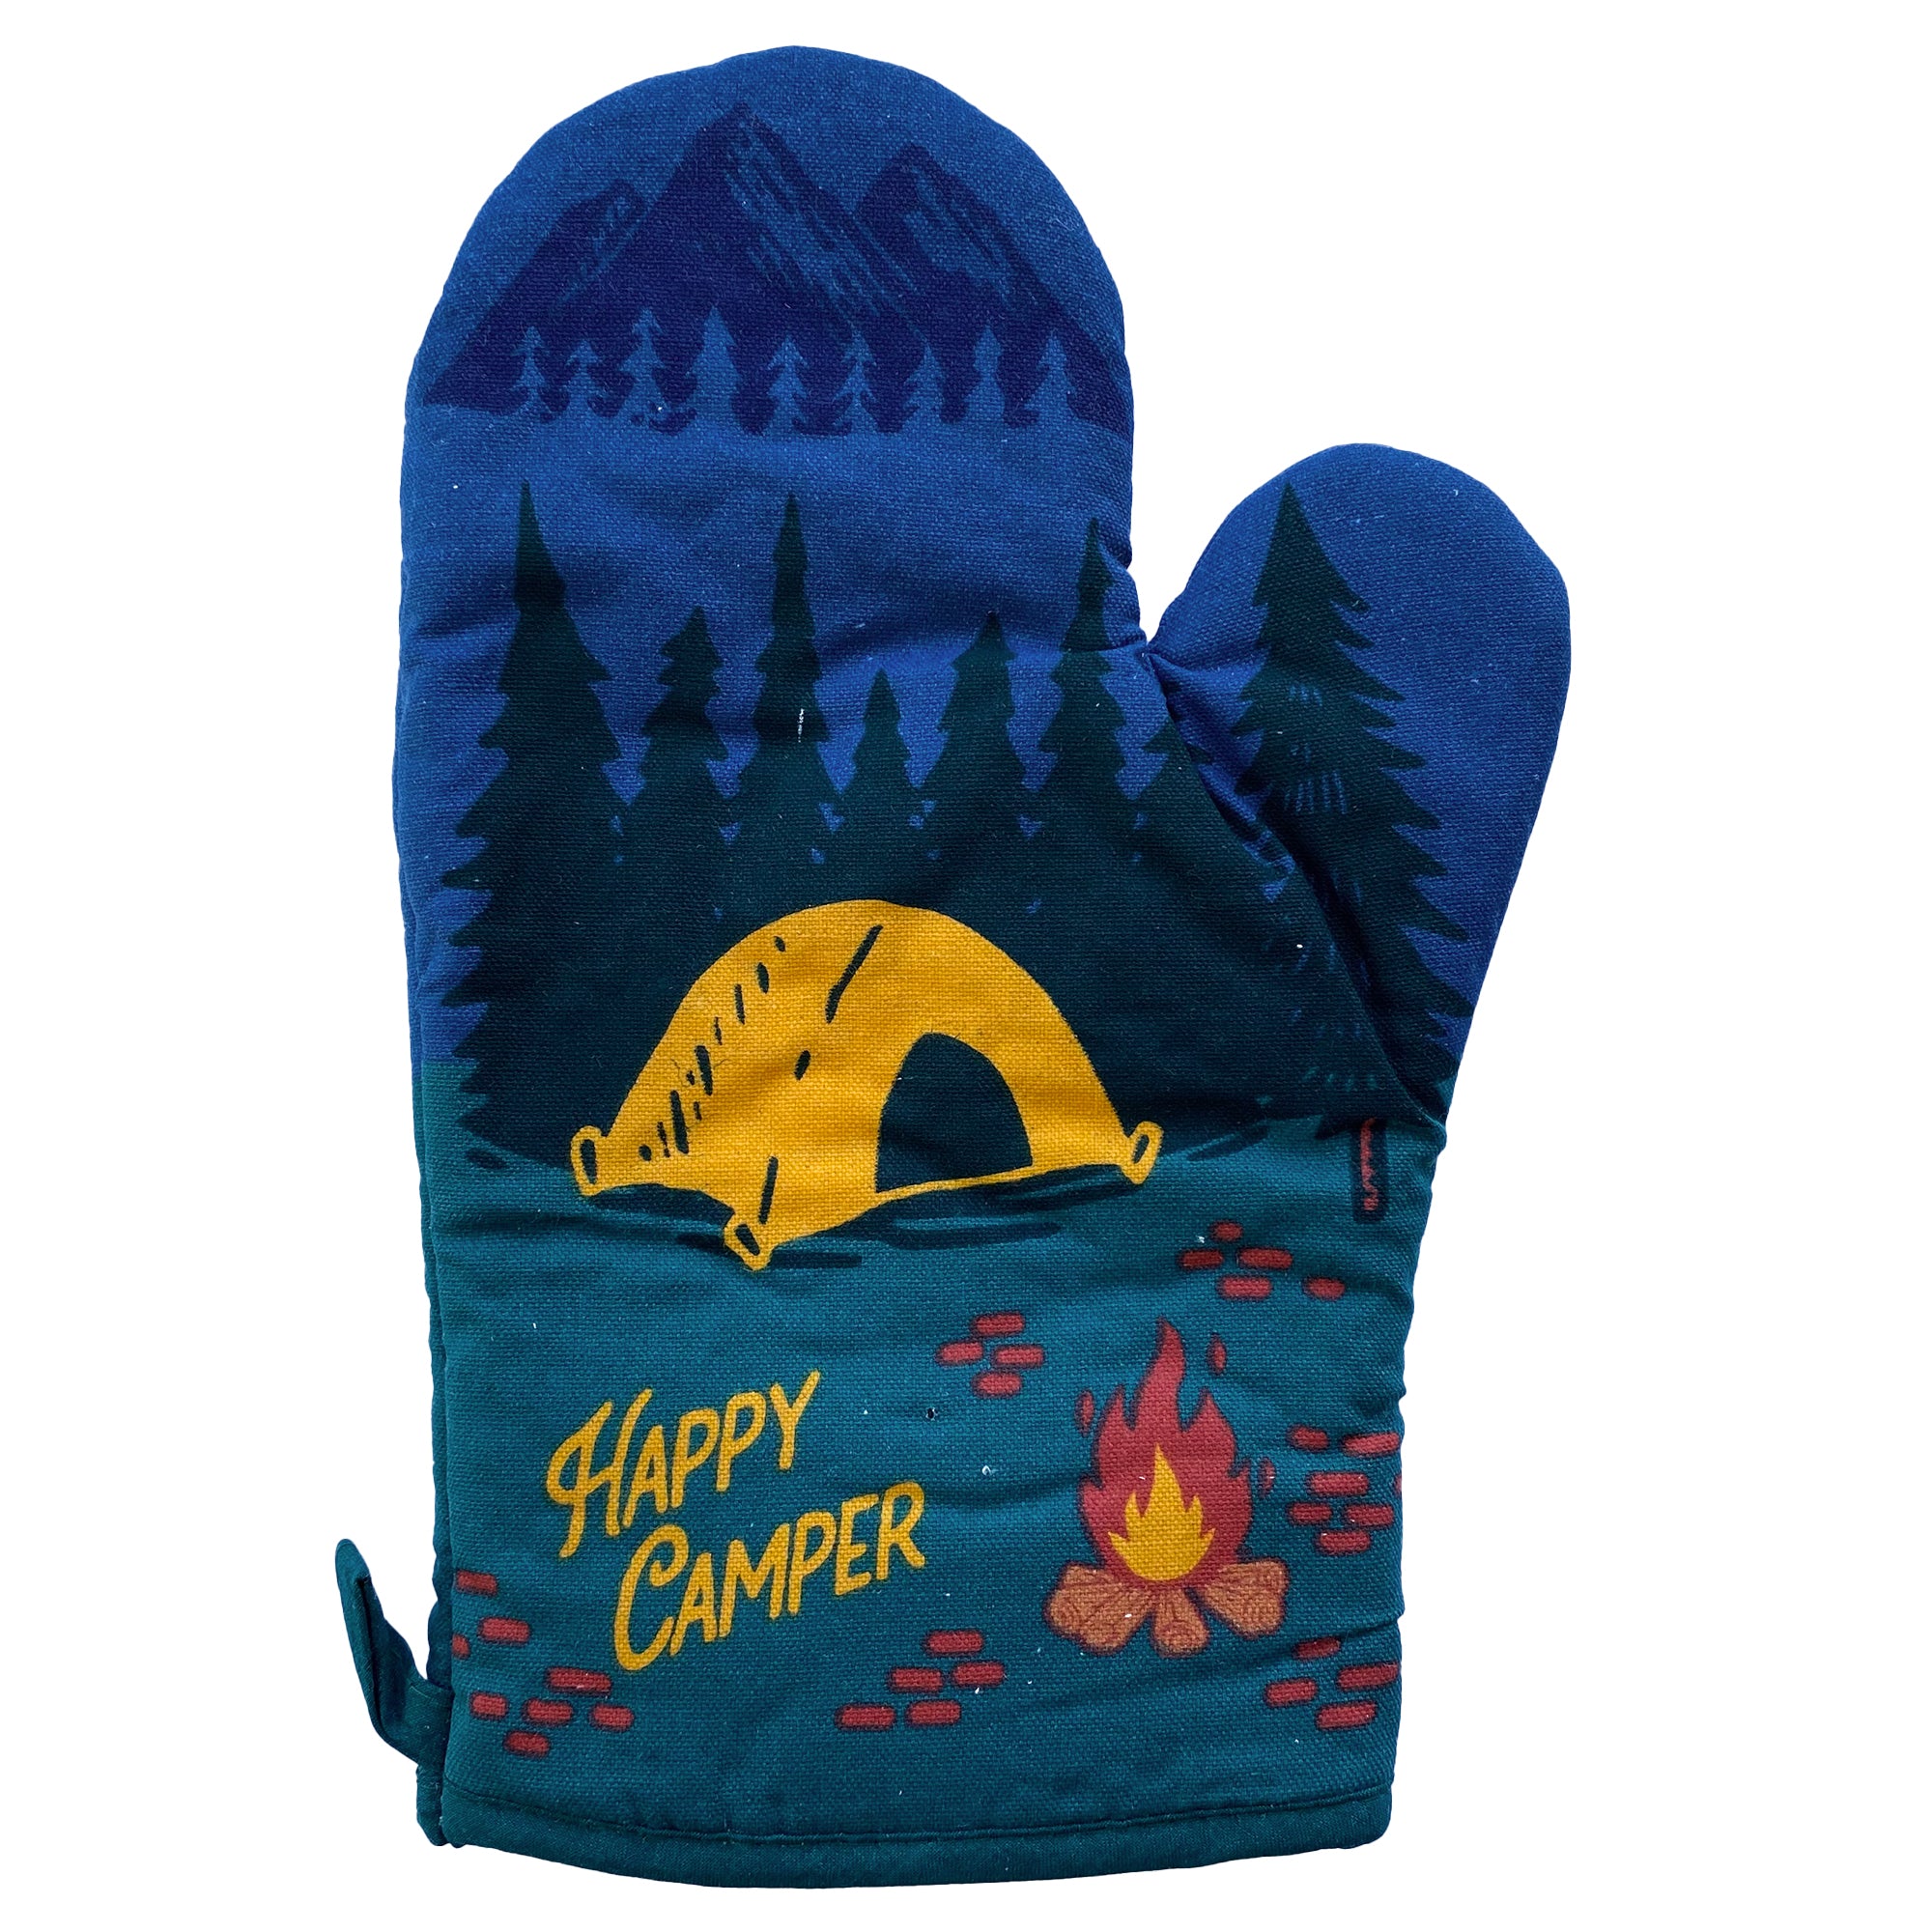 Happy Camper Oven Mitt Hiking Campfire Forest Nature Bonfire Kitchen Glove (Oven Mitts)